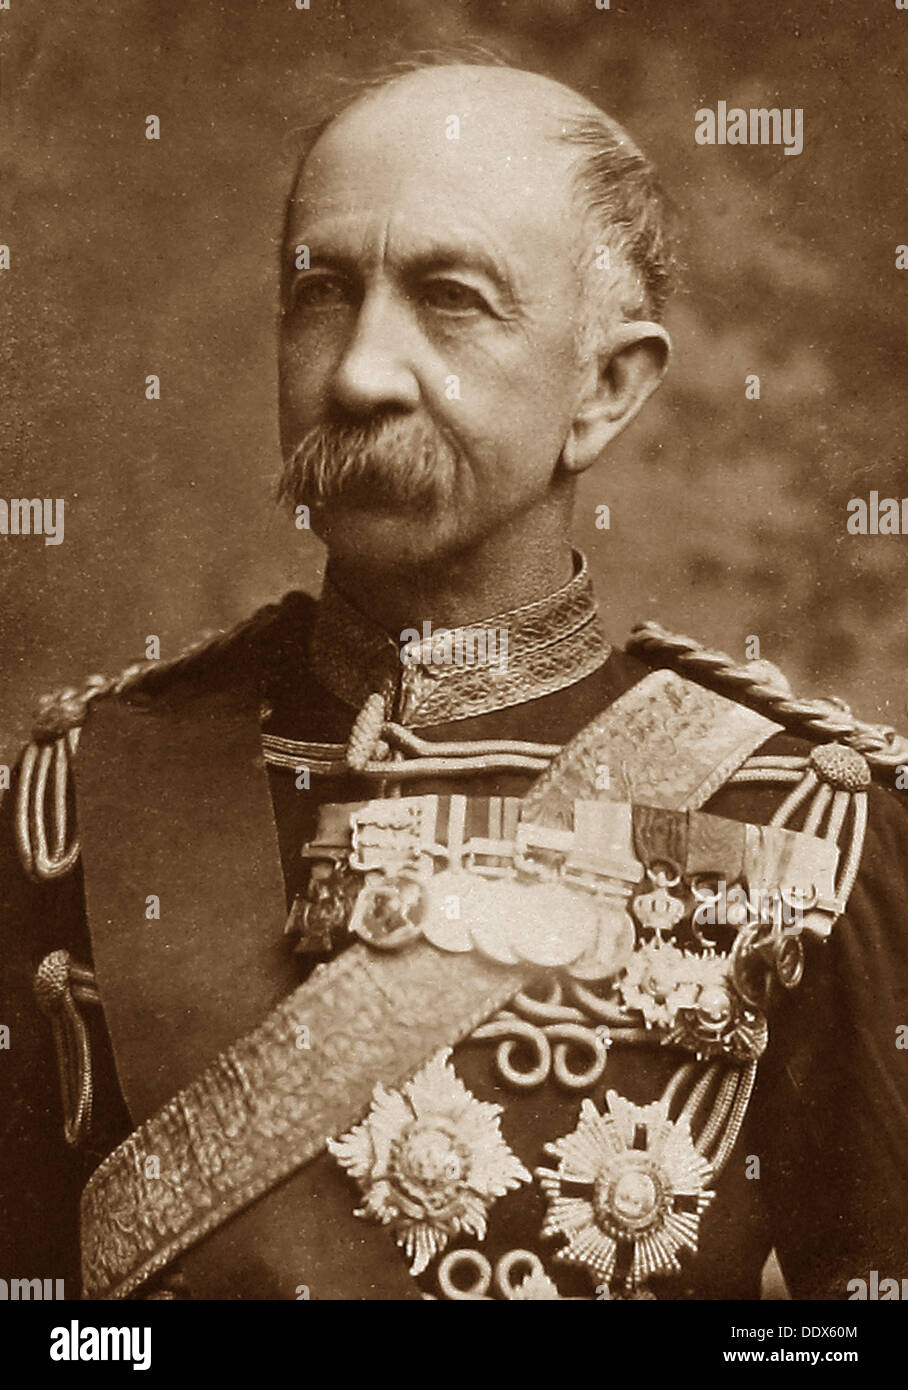 Sir Evelyn Wood VC Victorian period Stock Photo - Alamy